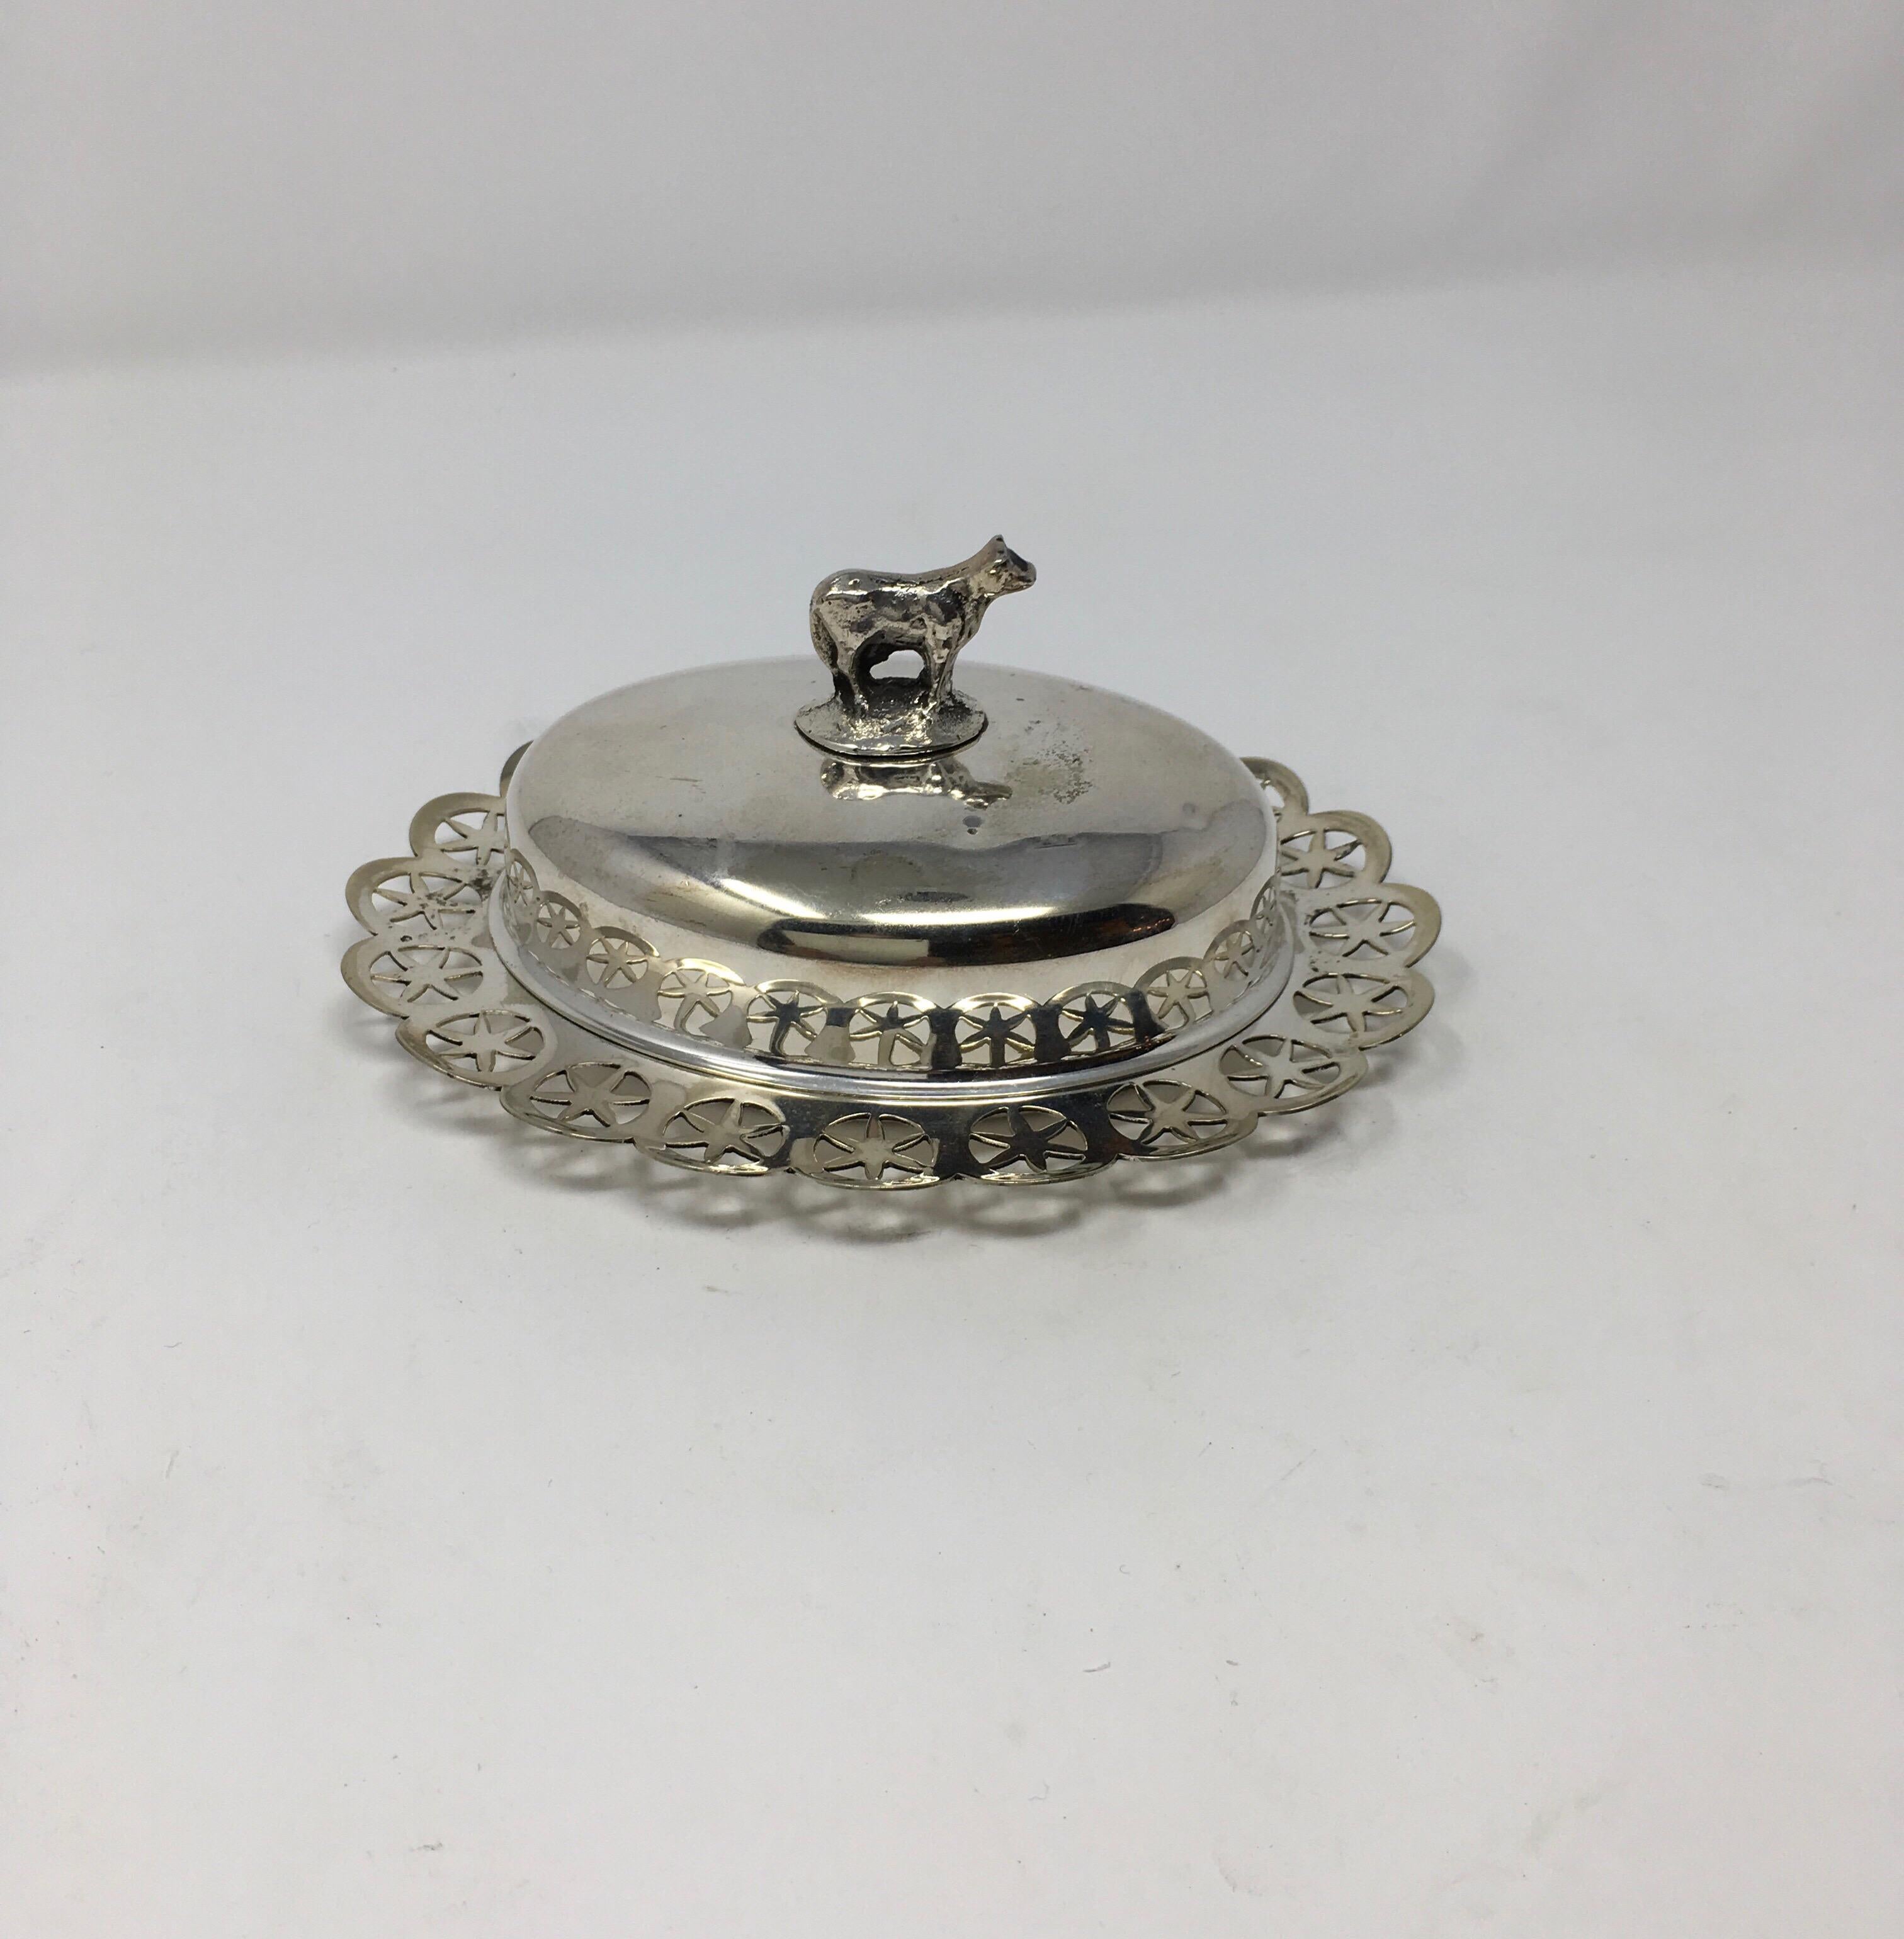 Found in England, this is a lovely covered butter dish with a standing cow finial on the cover. The server consists of three pieces, tray, dish and cover. The tray has a star pattern and measures 5